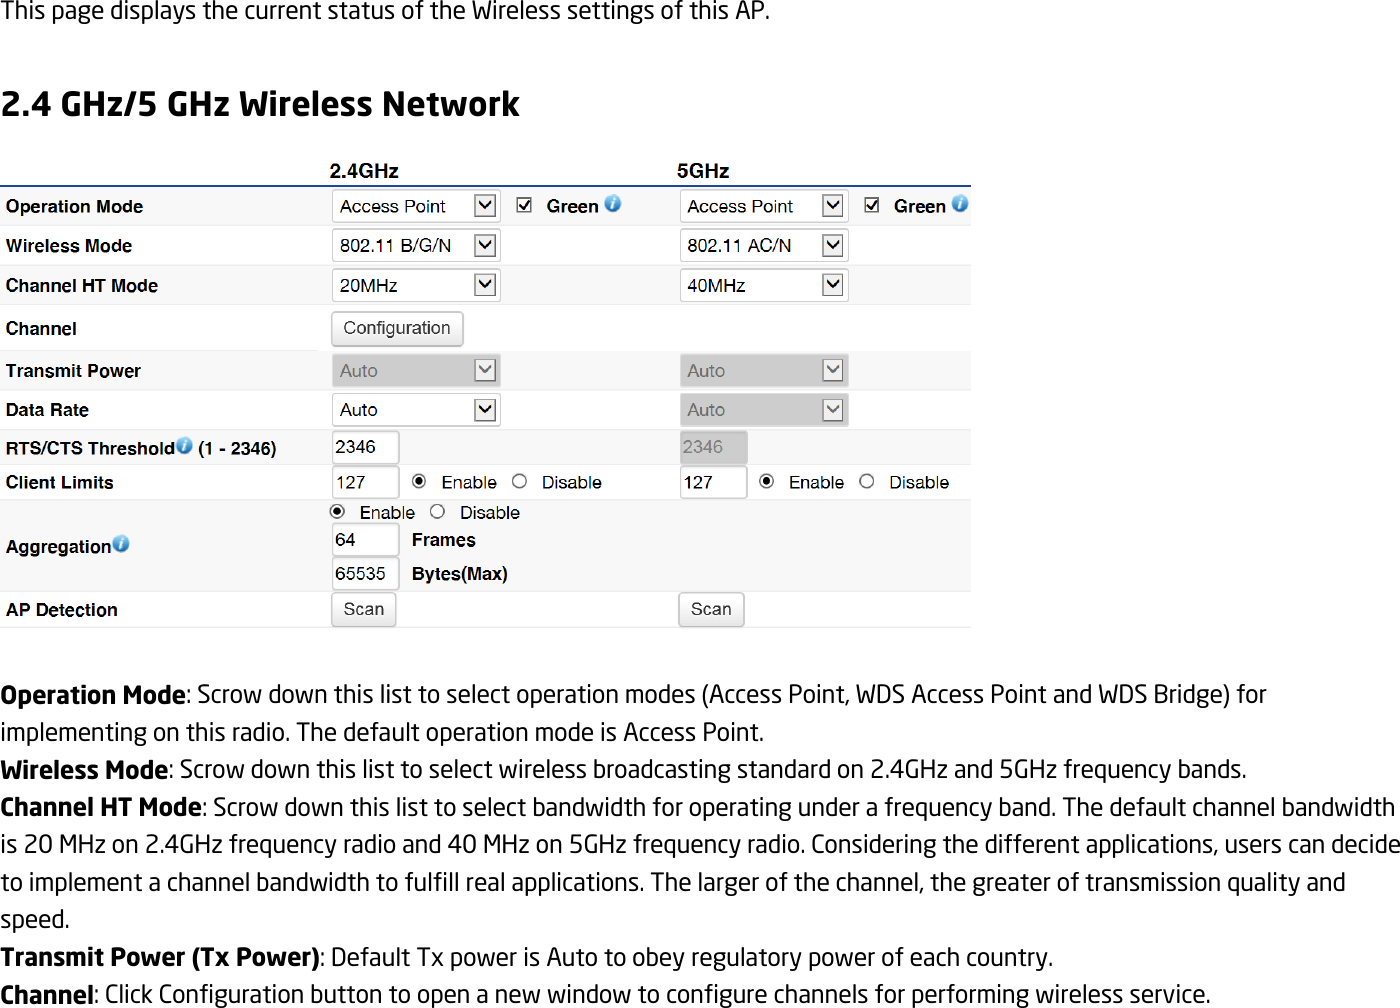 This page displays the current status of the Wireless settings of this AP.  2.4 GHz/5 GHz Wireless Network   Operation Mode: Scrow down this list to select operation modes (Access Point, WDS Access Point and WDS Bridge) for implementing on this radio. The default operation mode is Access Point.     Wireless Mode: Scrow down this list to select wireless broadcasting standard on 2.4GHz and 5GHz frequency bands. Channel HT Mode: Scrow down this list to select bandwidth for operating under a frequency band. The default channel bandwidth is 20 MHz on 2.4GHz frequency radio and 40 MHz on 5GHz frequency radio. Considering the different applications, users can decide to implement a channel bandwidth to fulfill real applications. The larger of the channel, the greater of transmission quality and speed. Transmit Power (Tx Power): Default Tx power is Auto to obey regulatory power of each country. Channel: Click Configuration button to open a new window to configure channels for performing wireless service. 